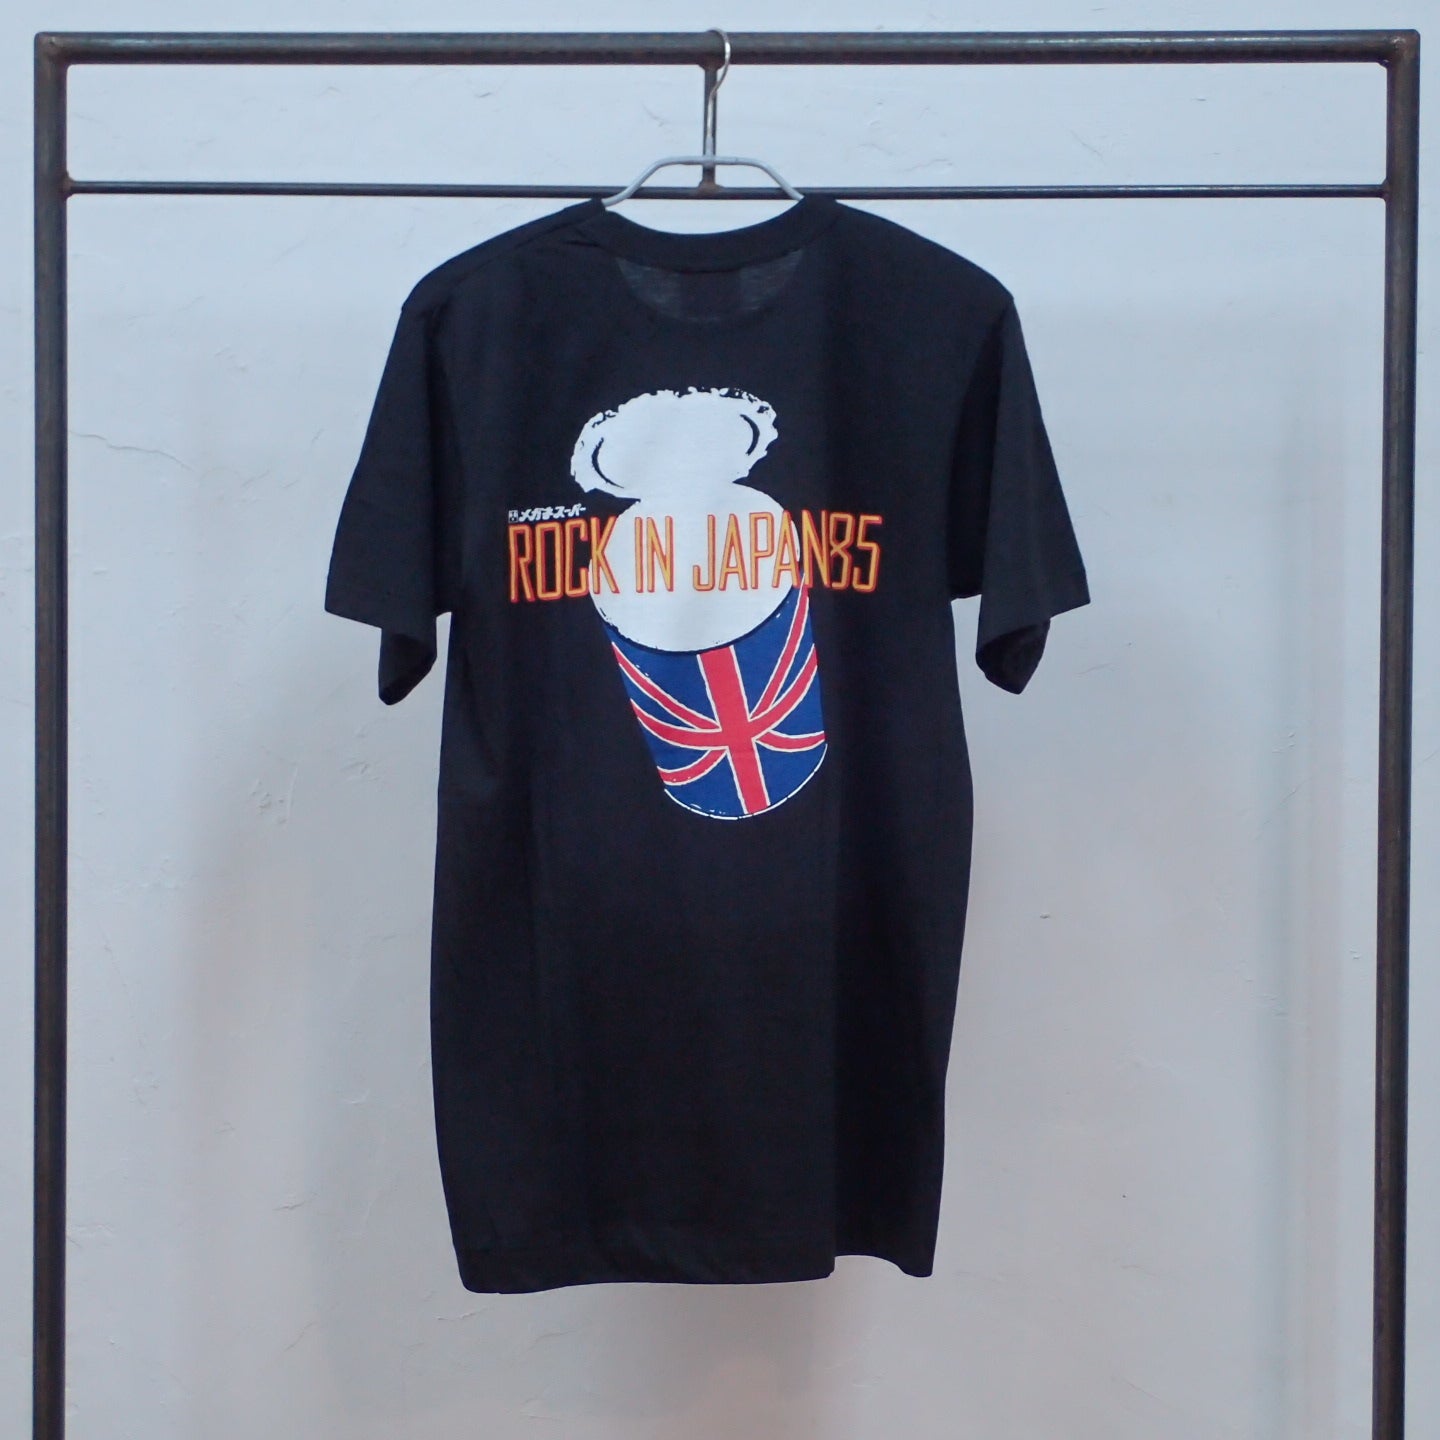 80s Style Council T-shirt "Rock In Japan 85 Tee"